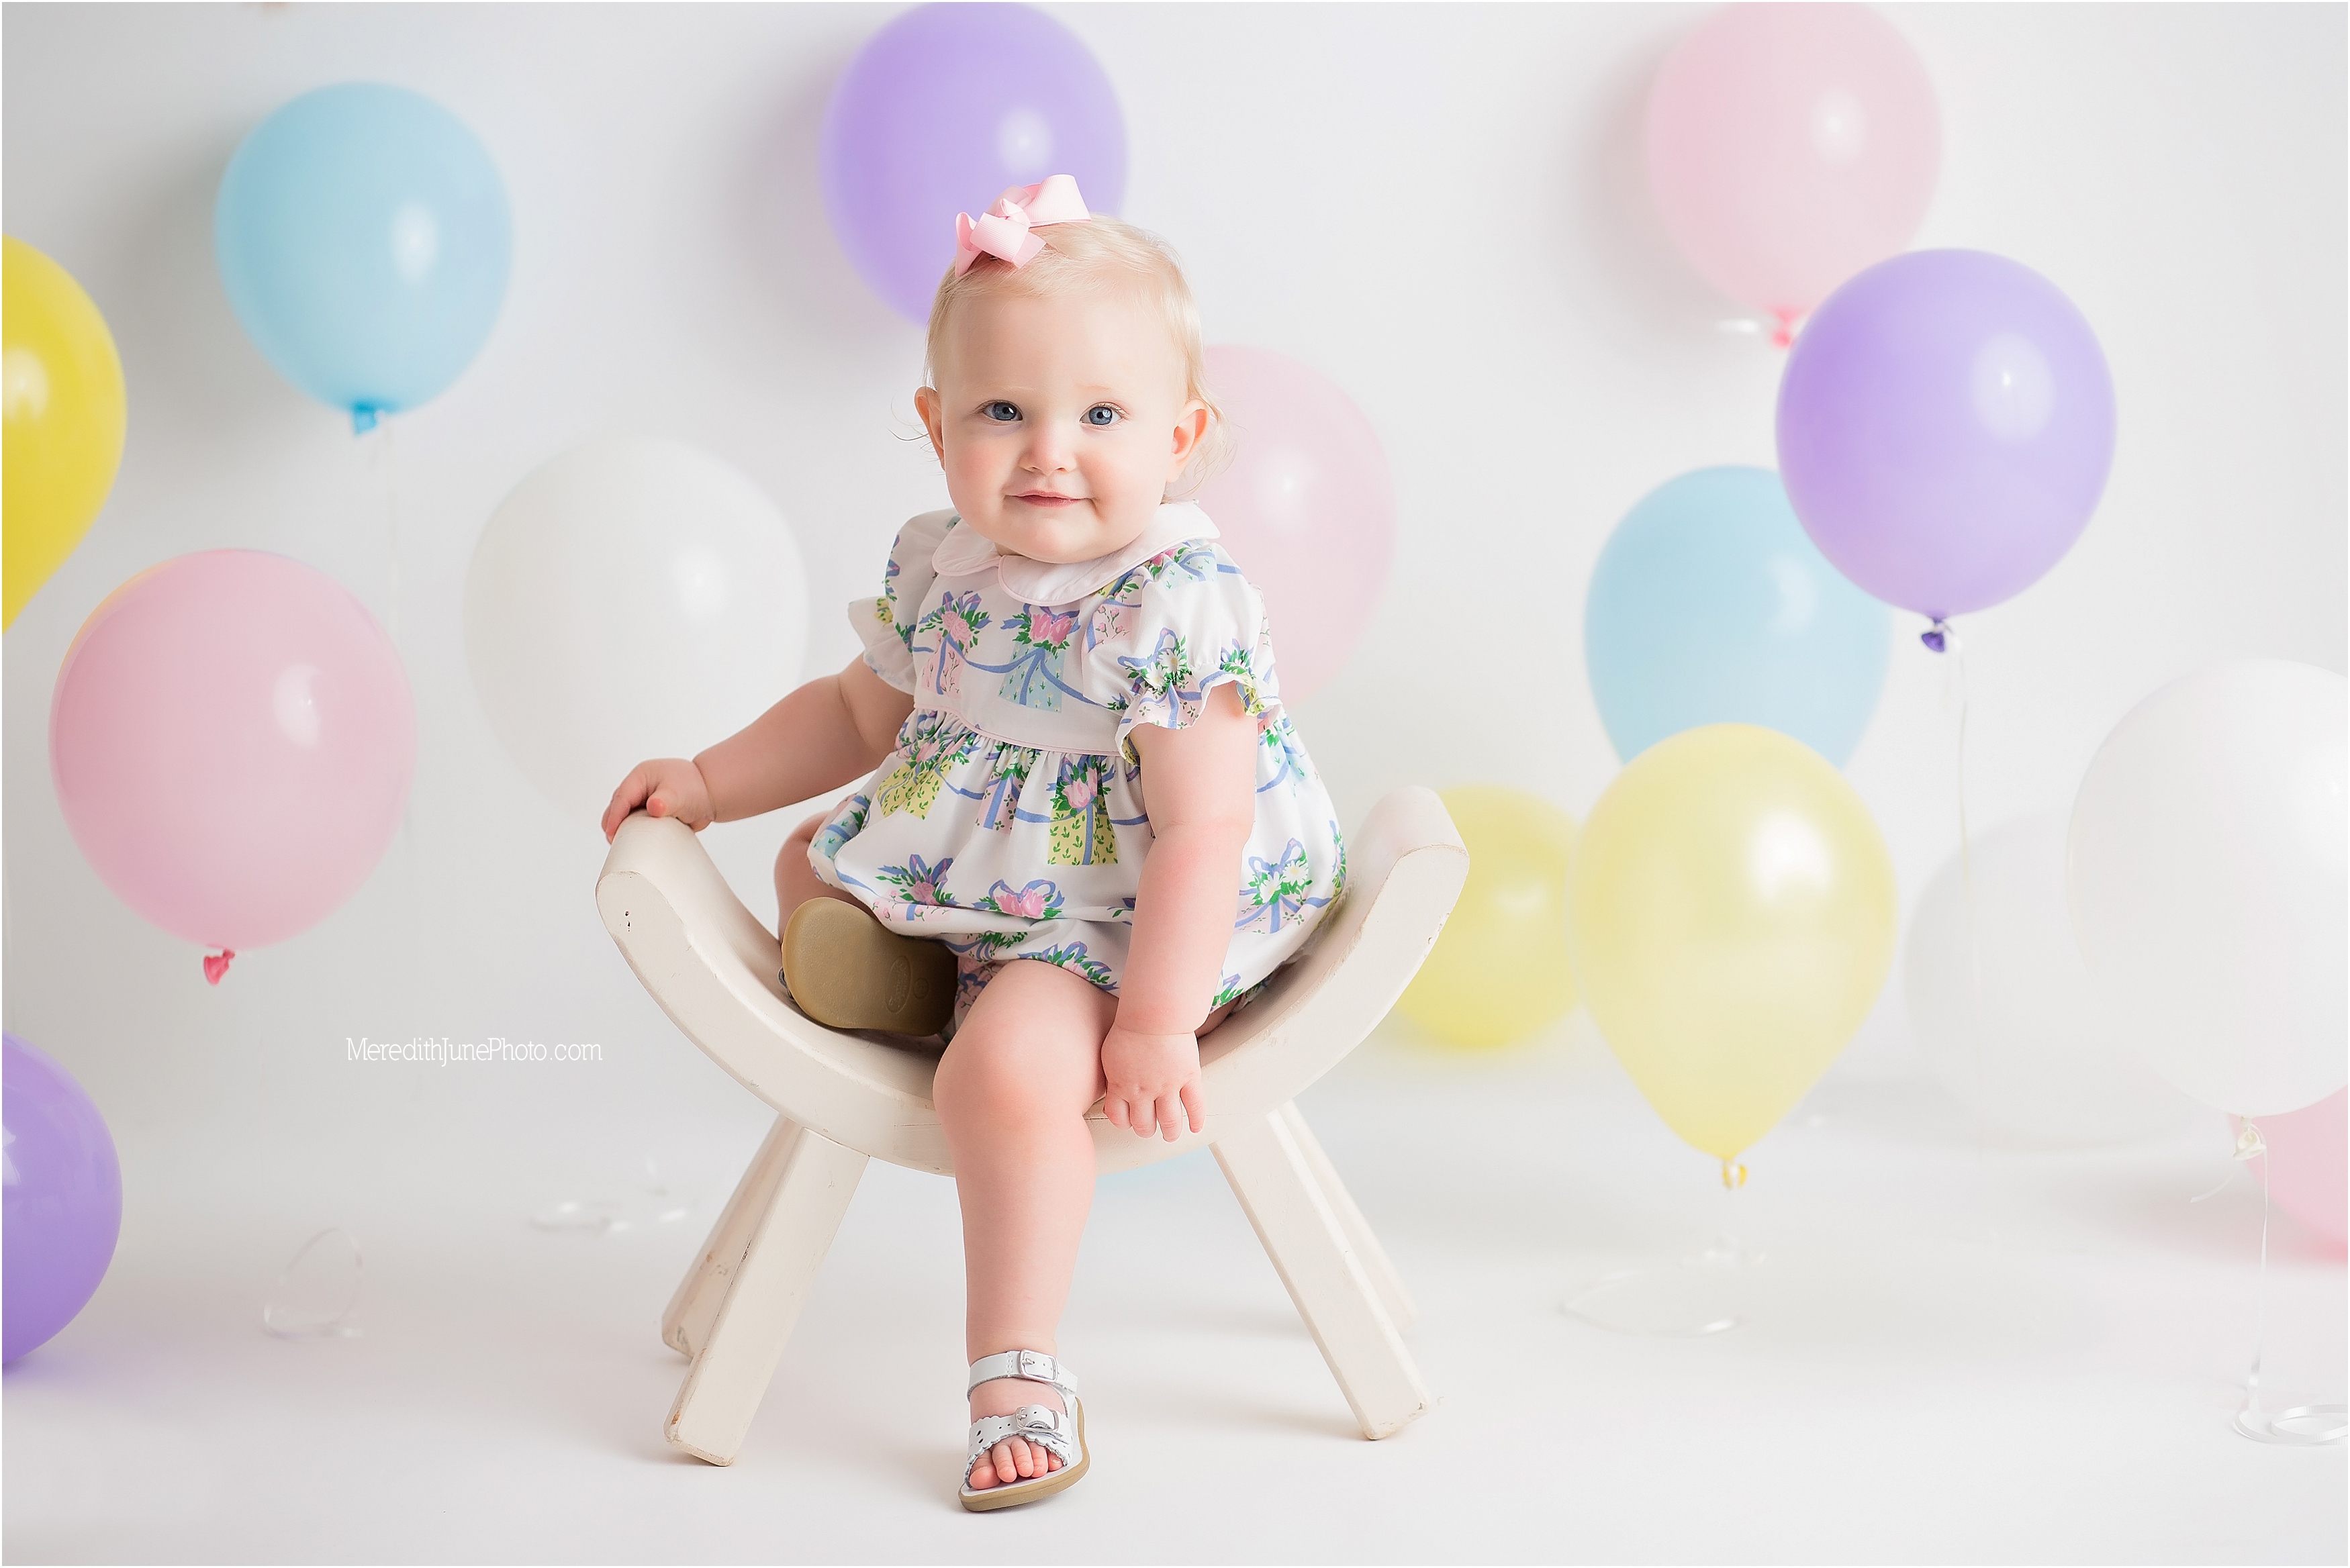 Murphy Jane turns one at Meredith June Photography 